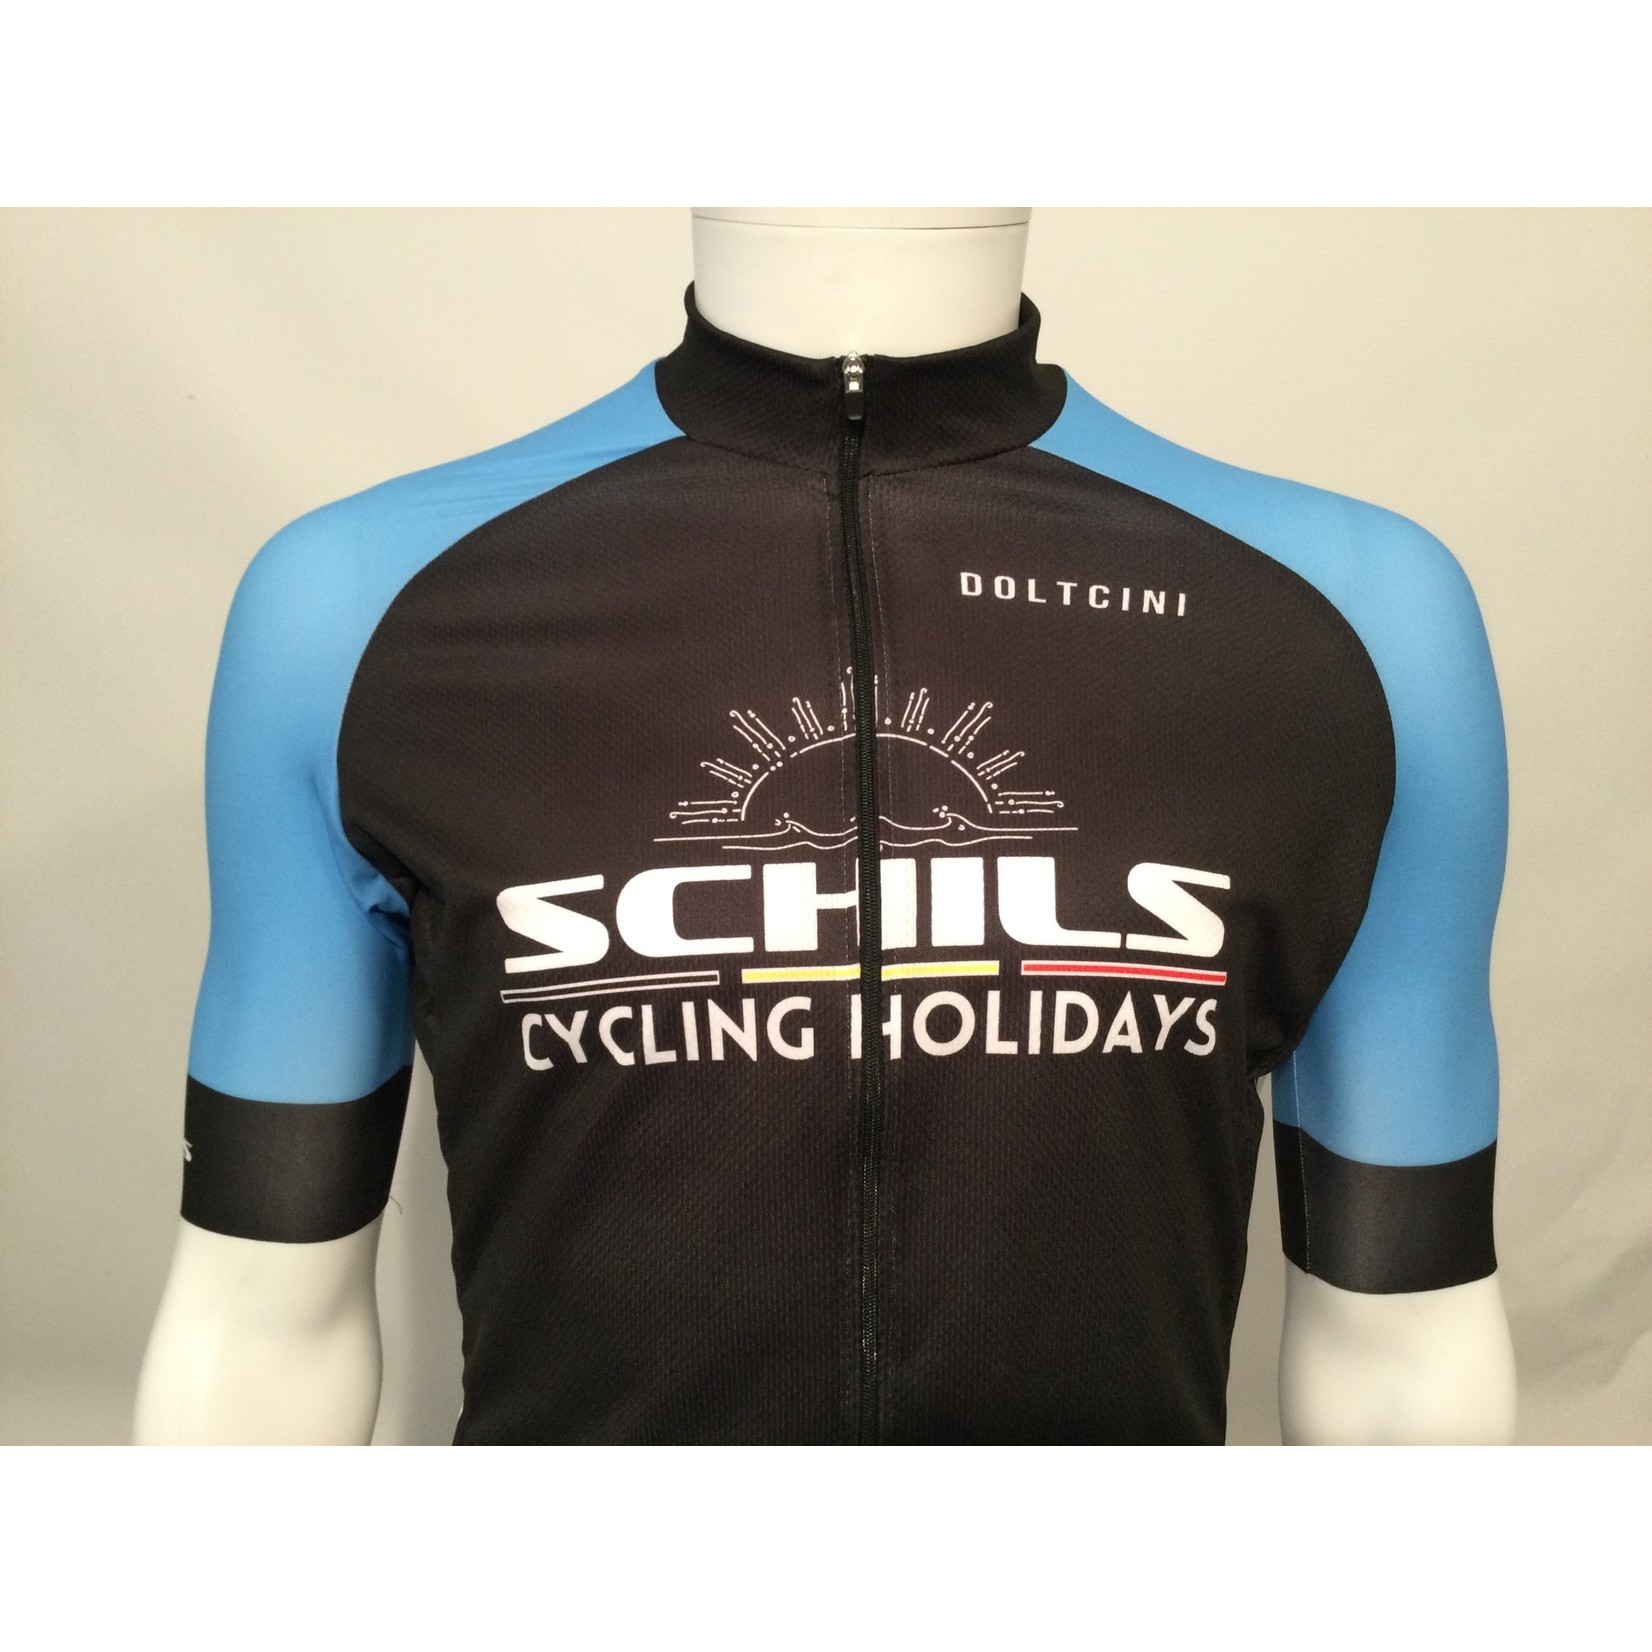 Schils Cycling Holidays Short Sleeved Jersey